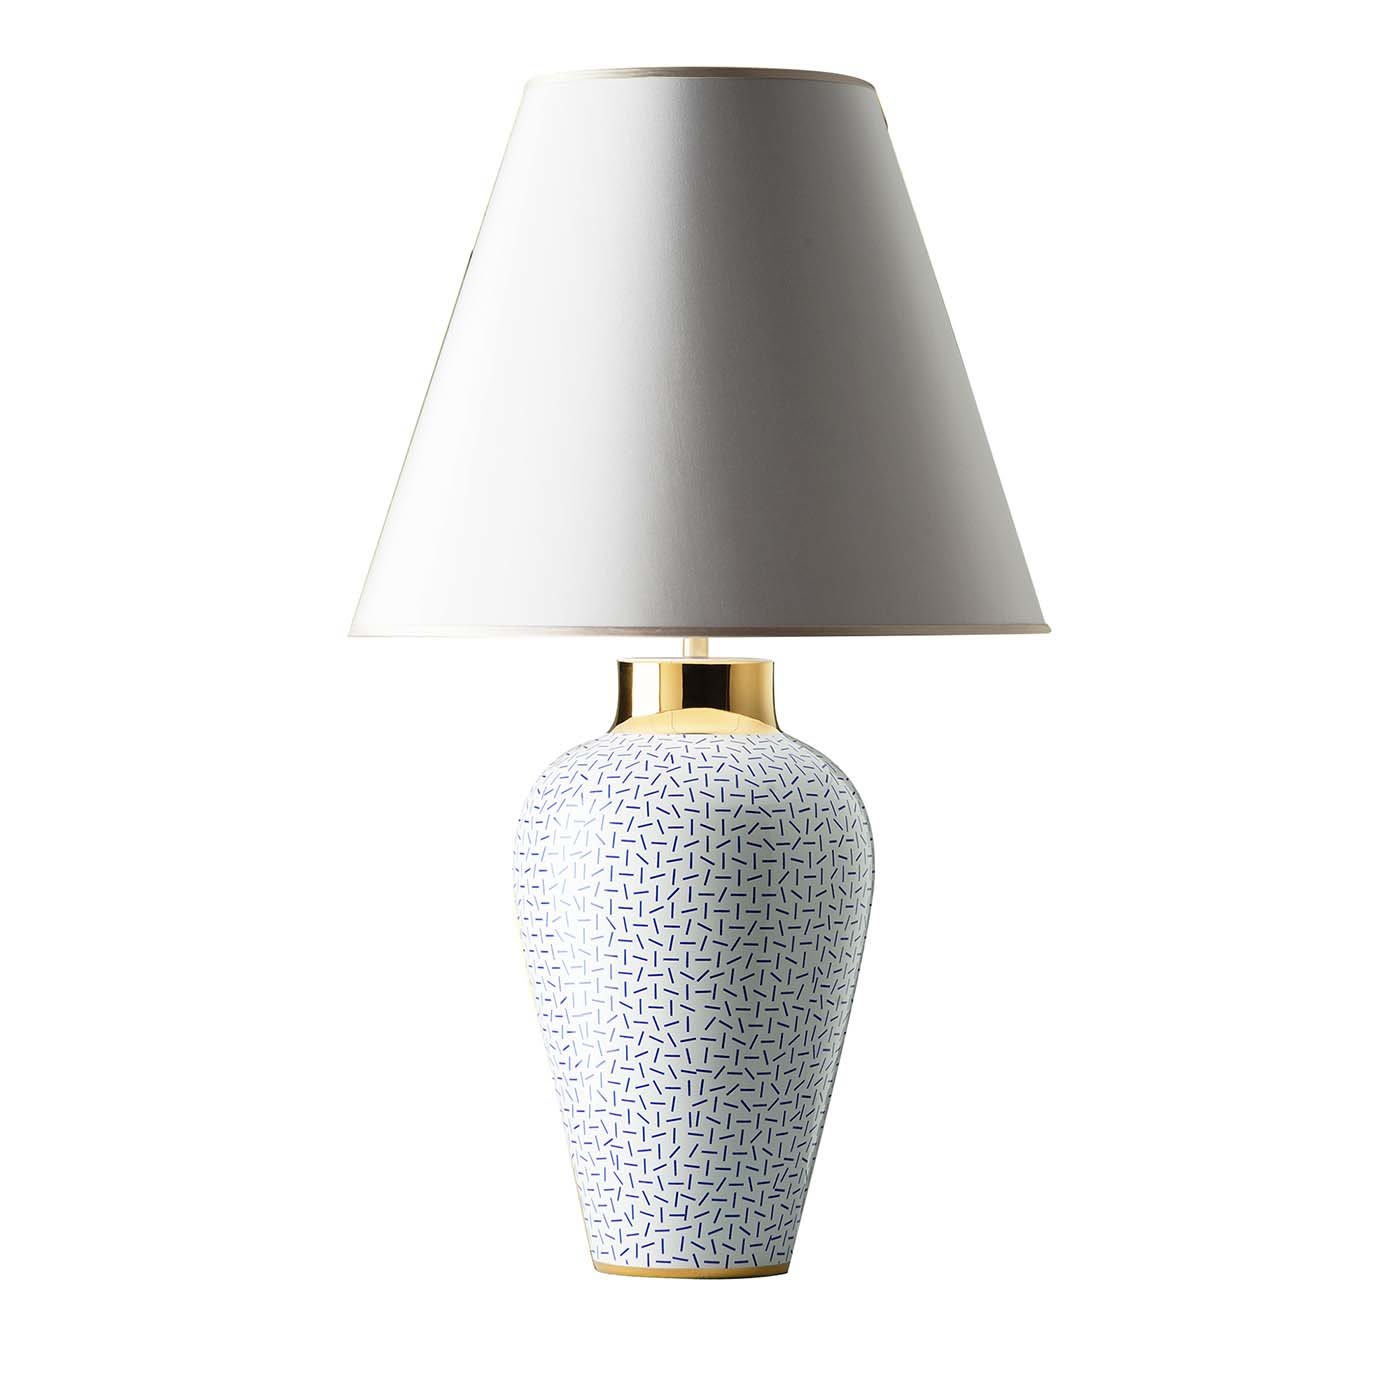 Clementine Tall Table Lamp - Le Porcellane